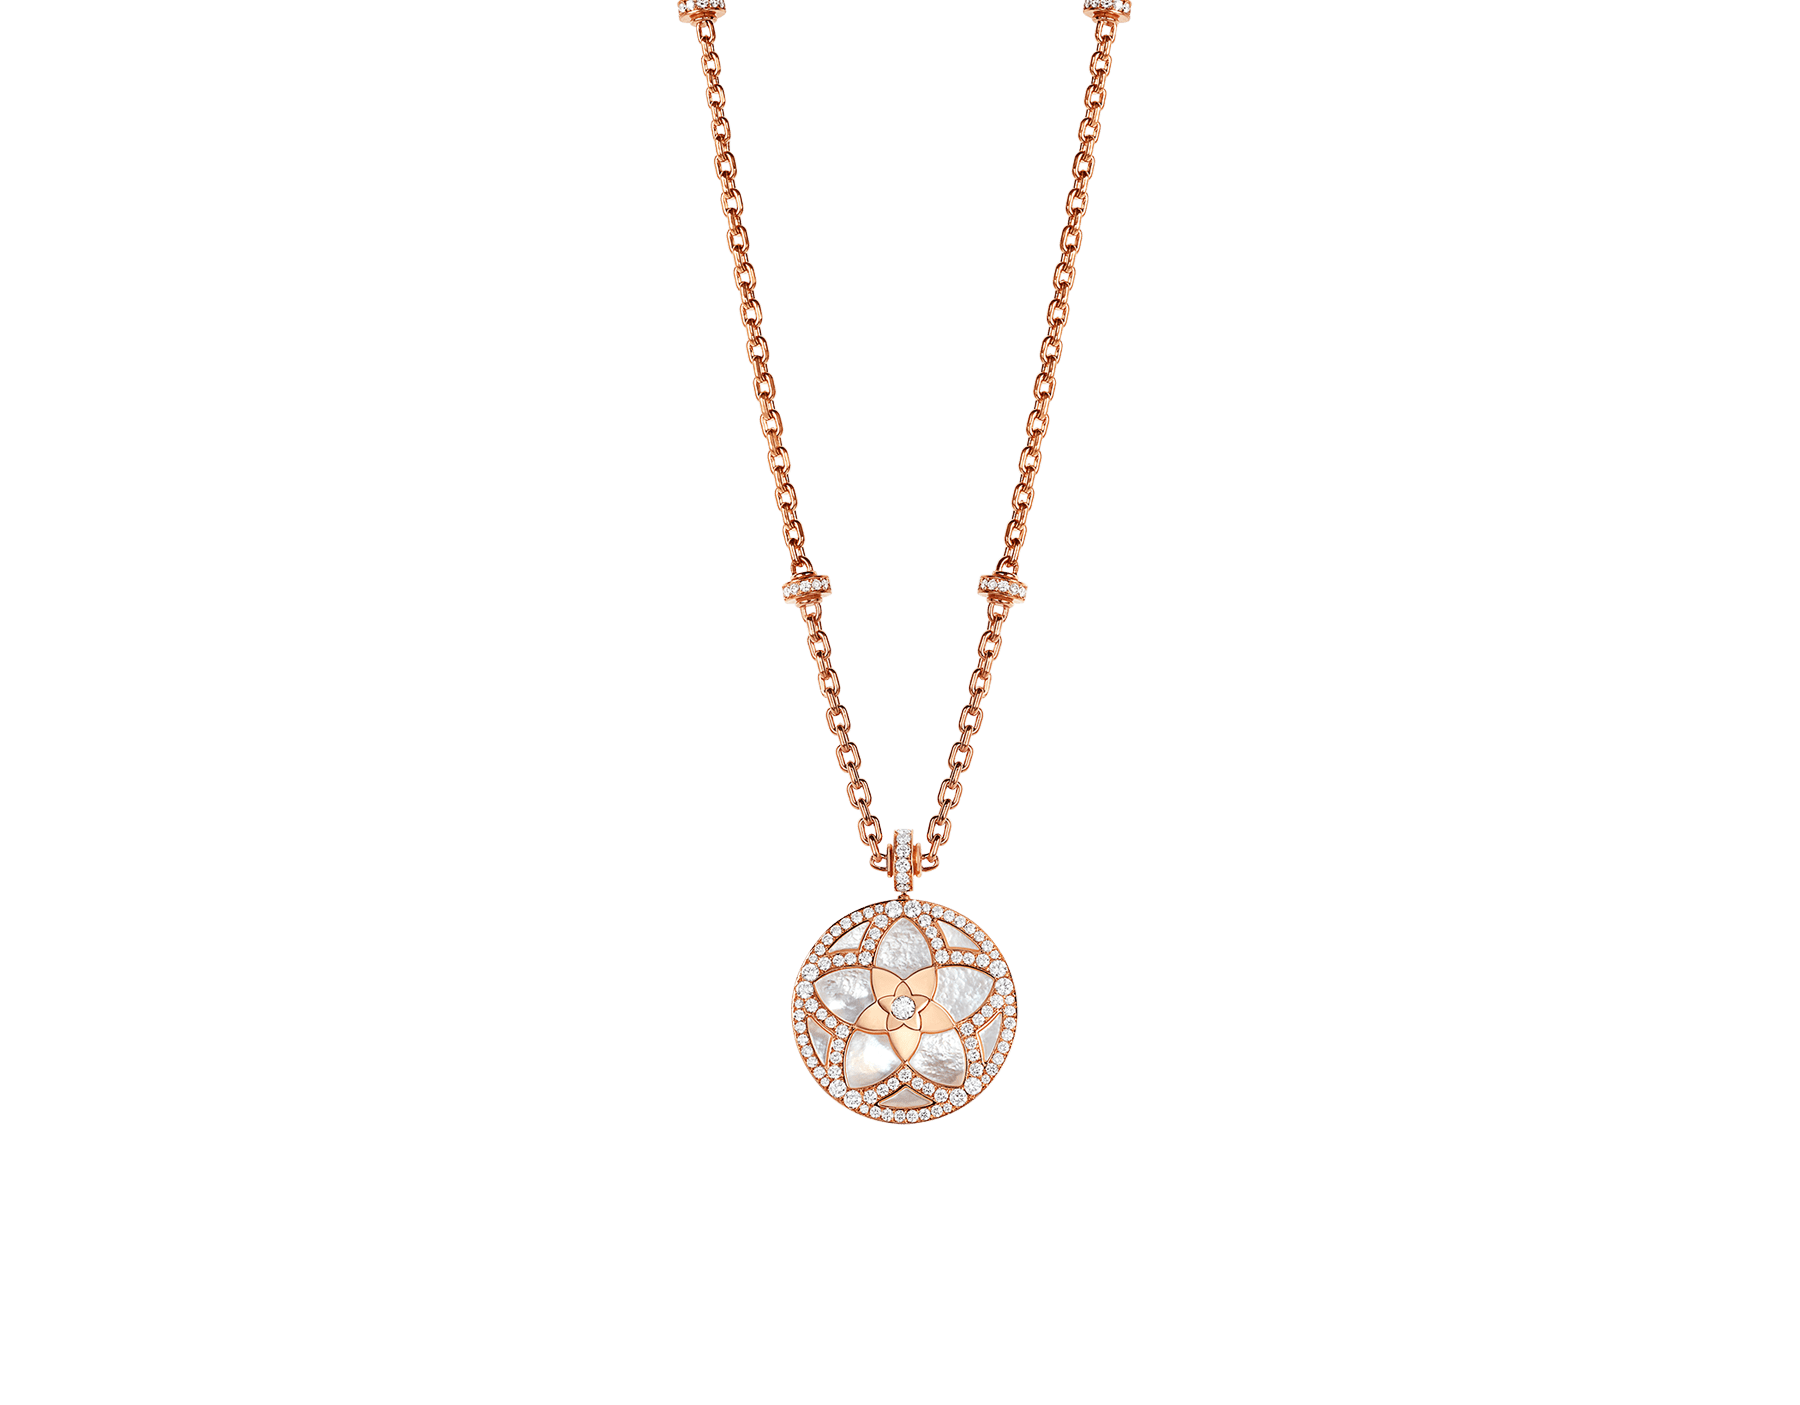 Jannah Flower 18 kt rose gold pendant necklace set with mother-of-pearl inserts and pavé diamonds 358490 image 1